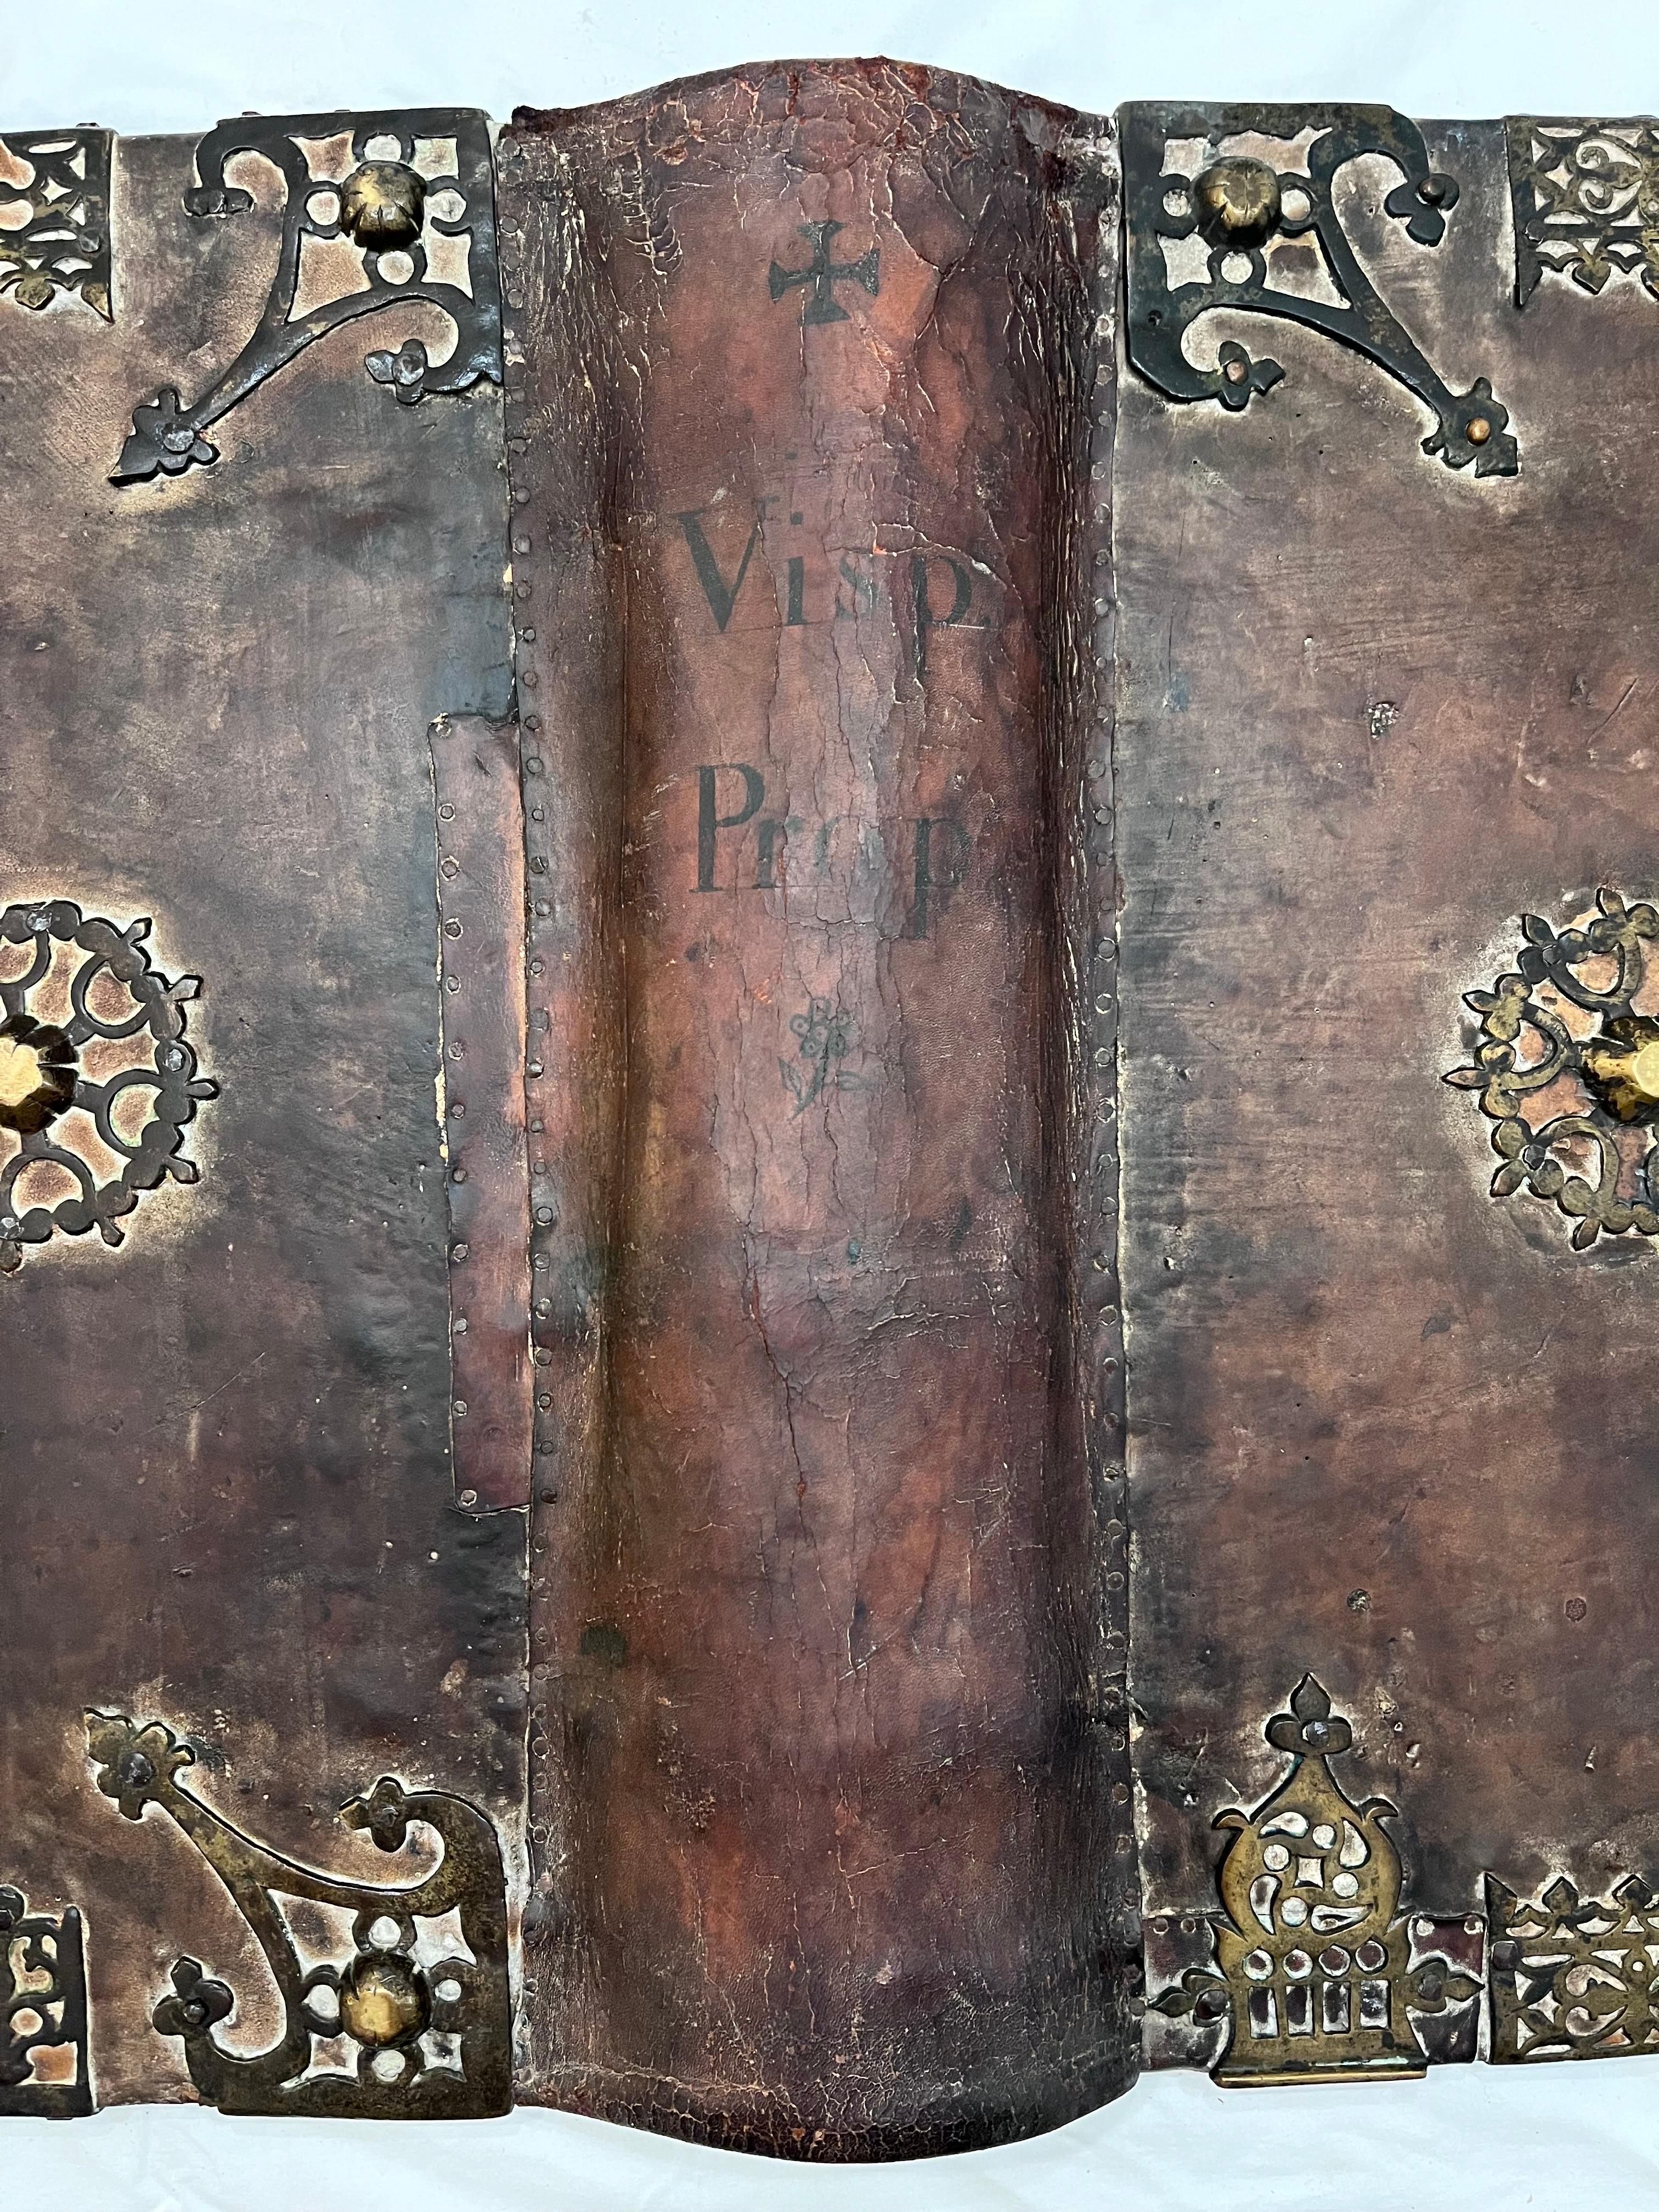 An antique animal skin or vellum book binding with brass or possibly bronze mounts (sometimes called furniture - centerpiece, corner pieces) of monumental scale. The work measures almost two feet in height! There is one page remaining, history has